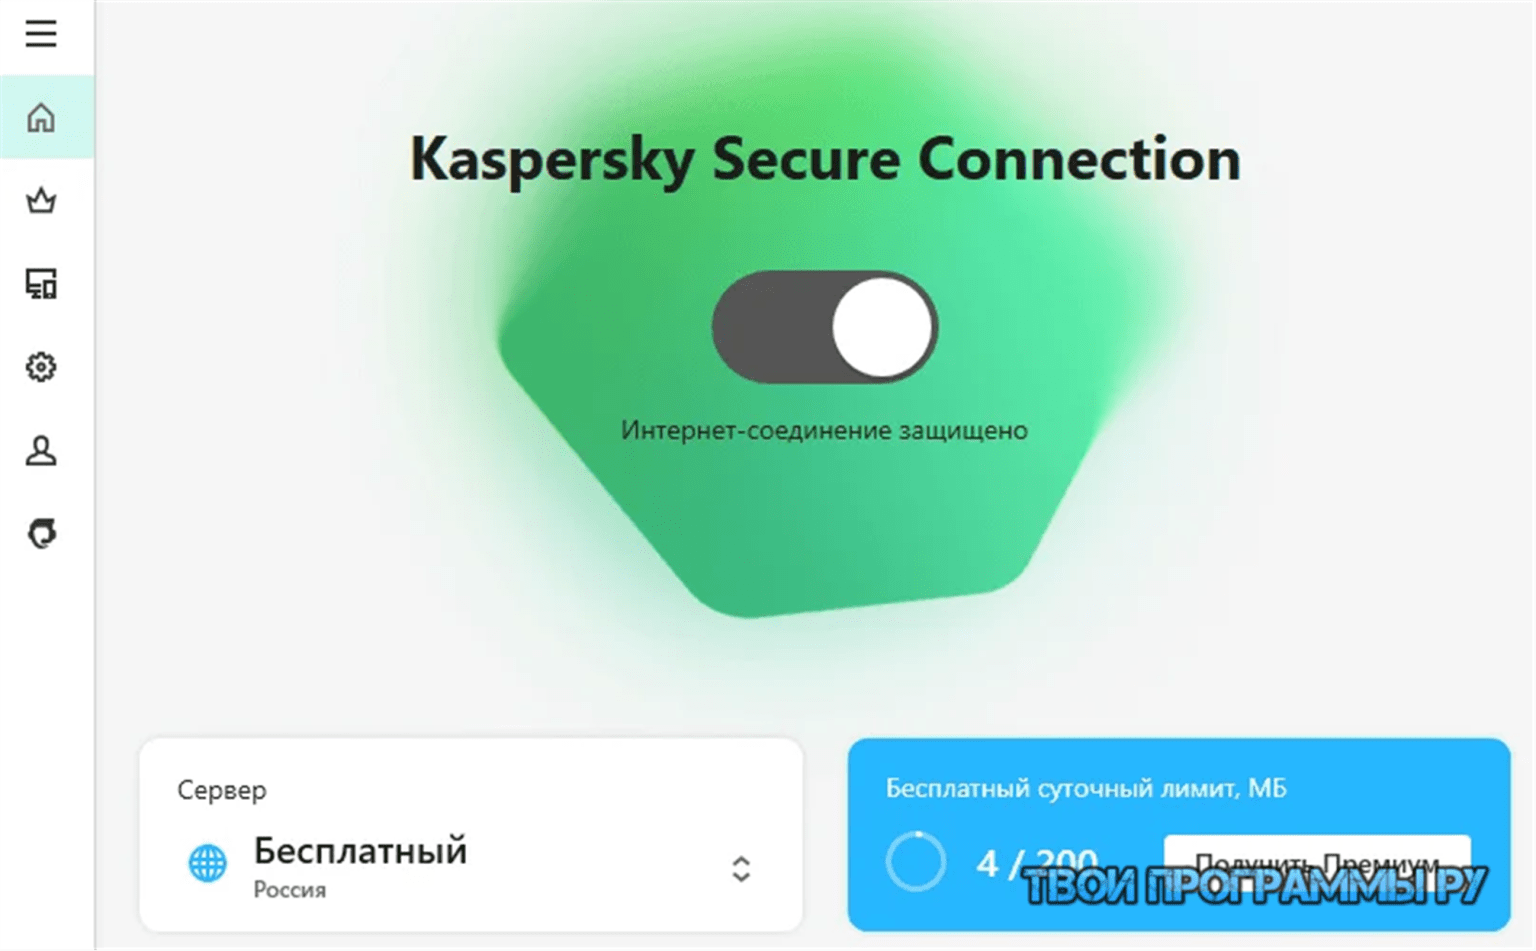 Connected secured. Kaspersky secure connection. Kaspersky secure connection (VPN). Kaspersky secure connection код активации. Secure connection активация.